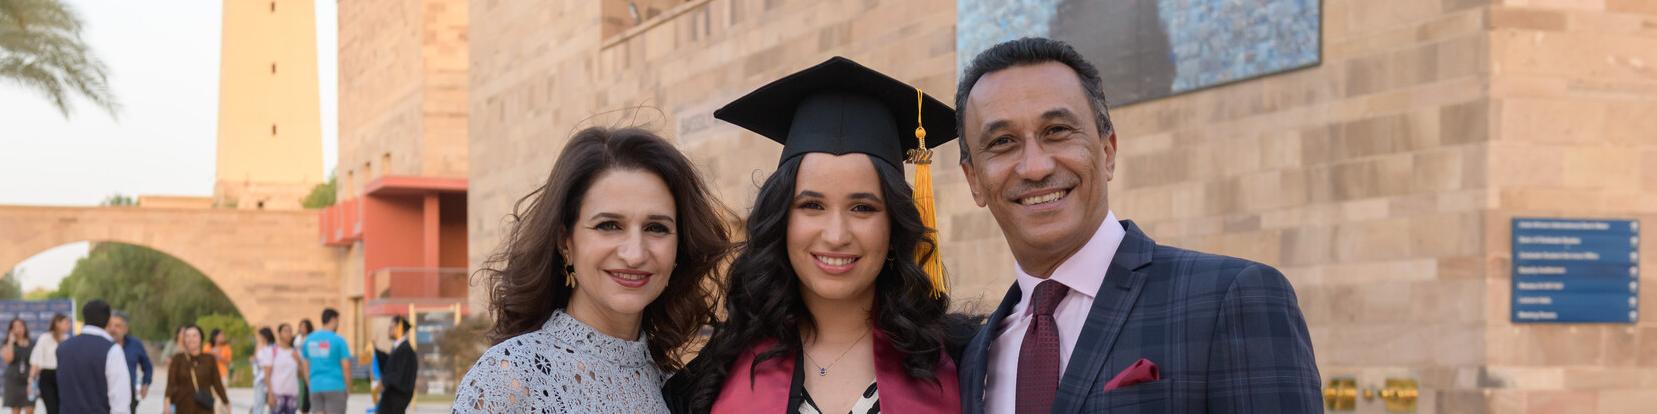 Graduate student with her parents